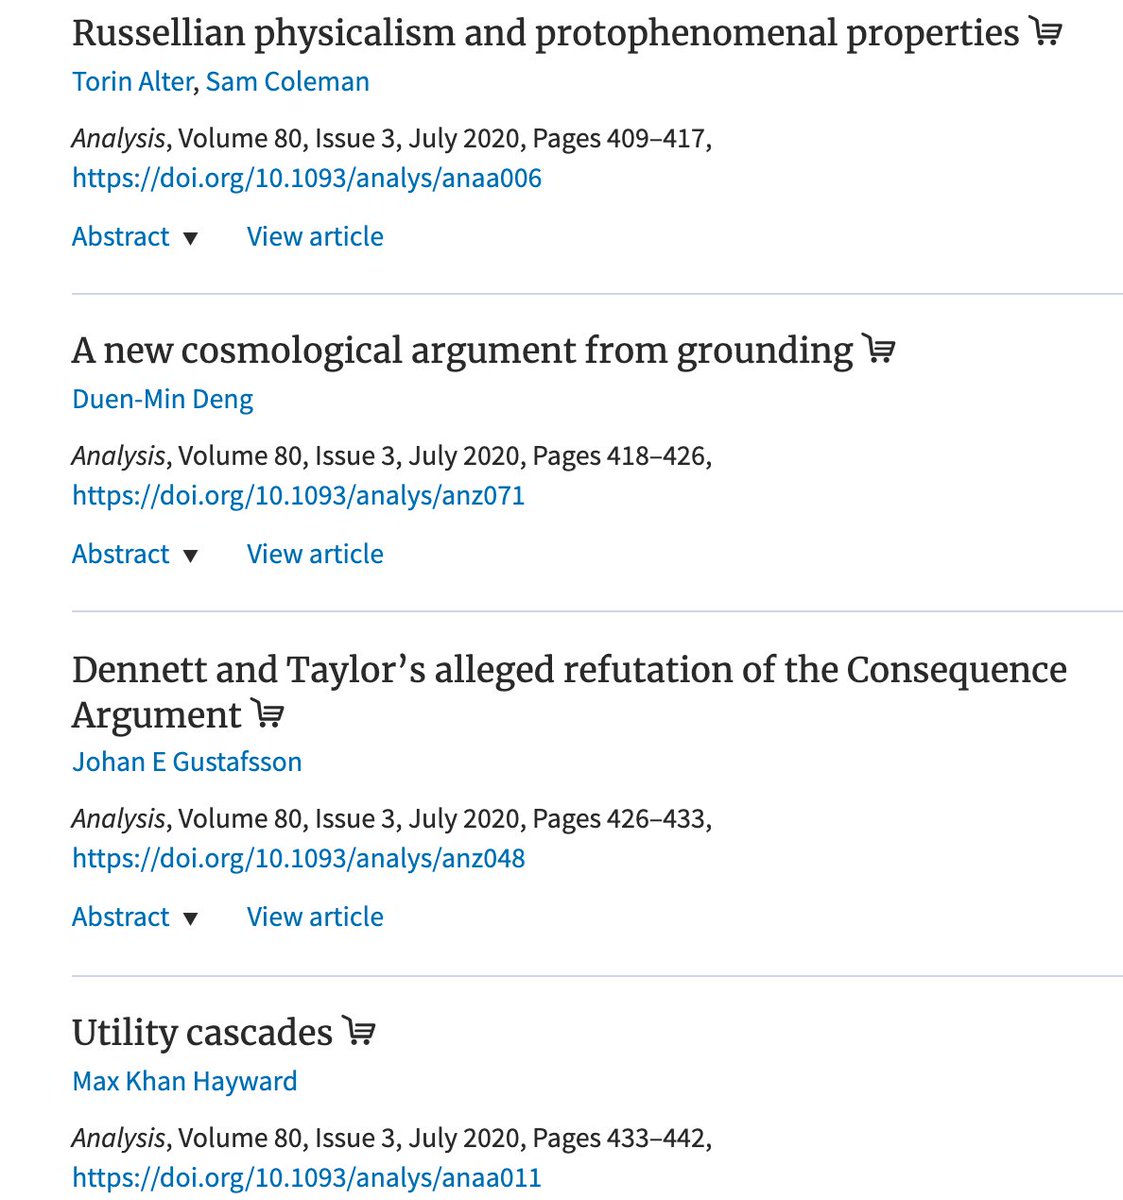 Analysis (a whole lot of book reviews not pictured or counted - none relevant, a couple on "conservatism" but both in the sense of metaphysics which aligns with ordinary intuitions). 0/12 https://academic.oup.com/analysis/issue 